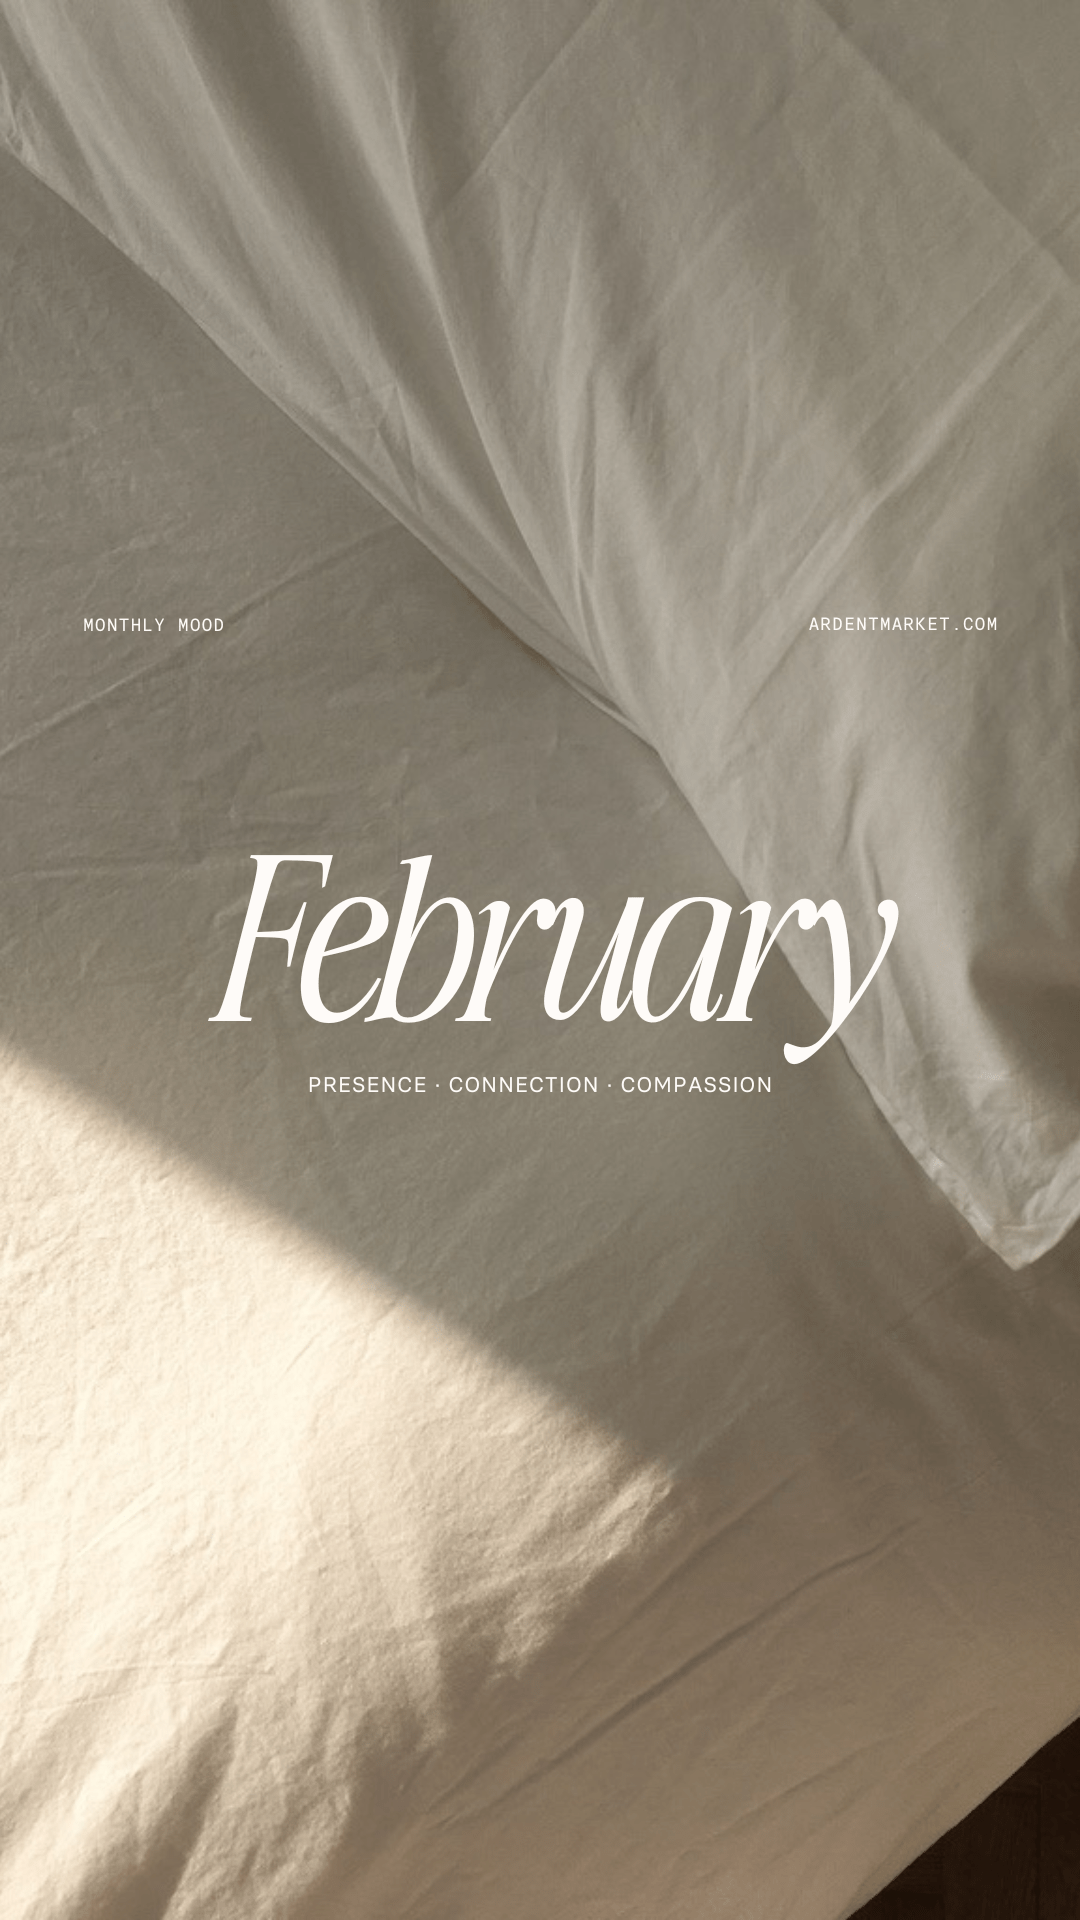 A Gentle Journey into February - Ardent Market